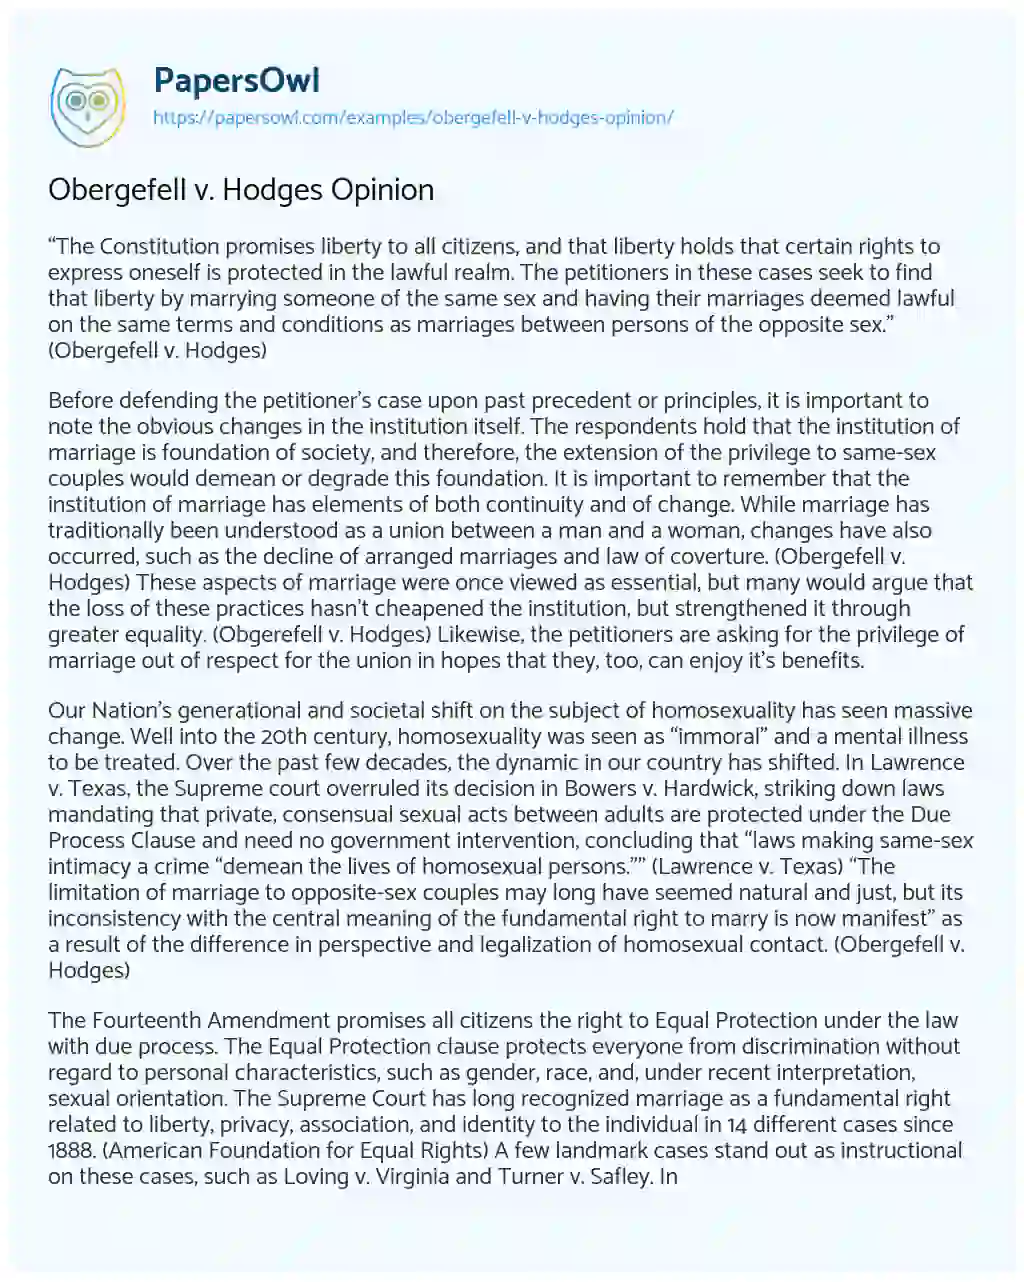 Essay on Obergefell V. Hodges Opinion